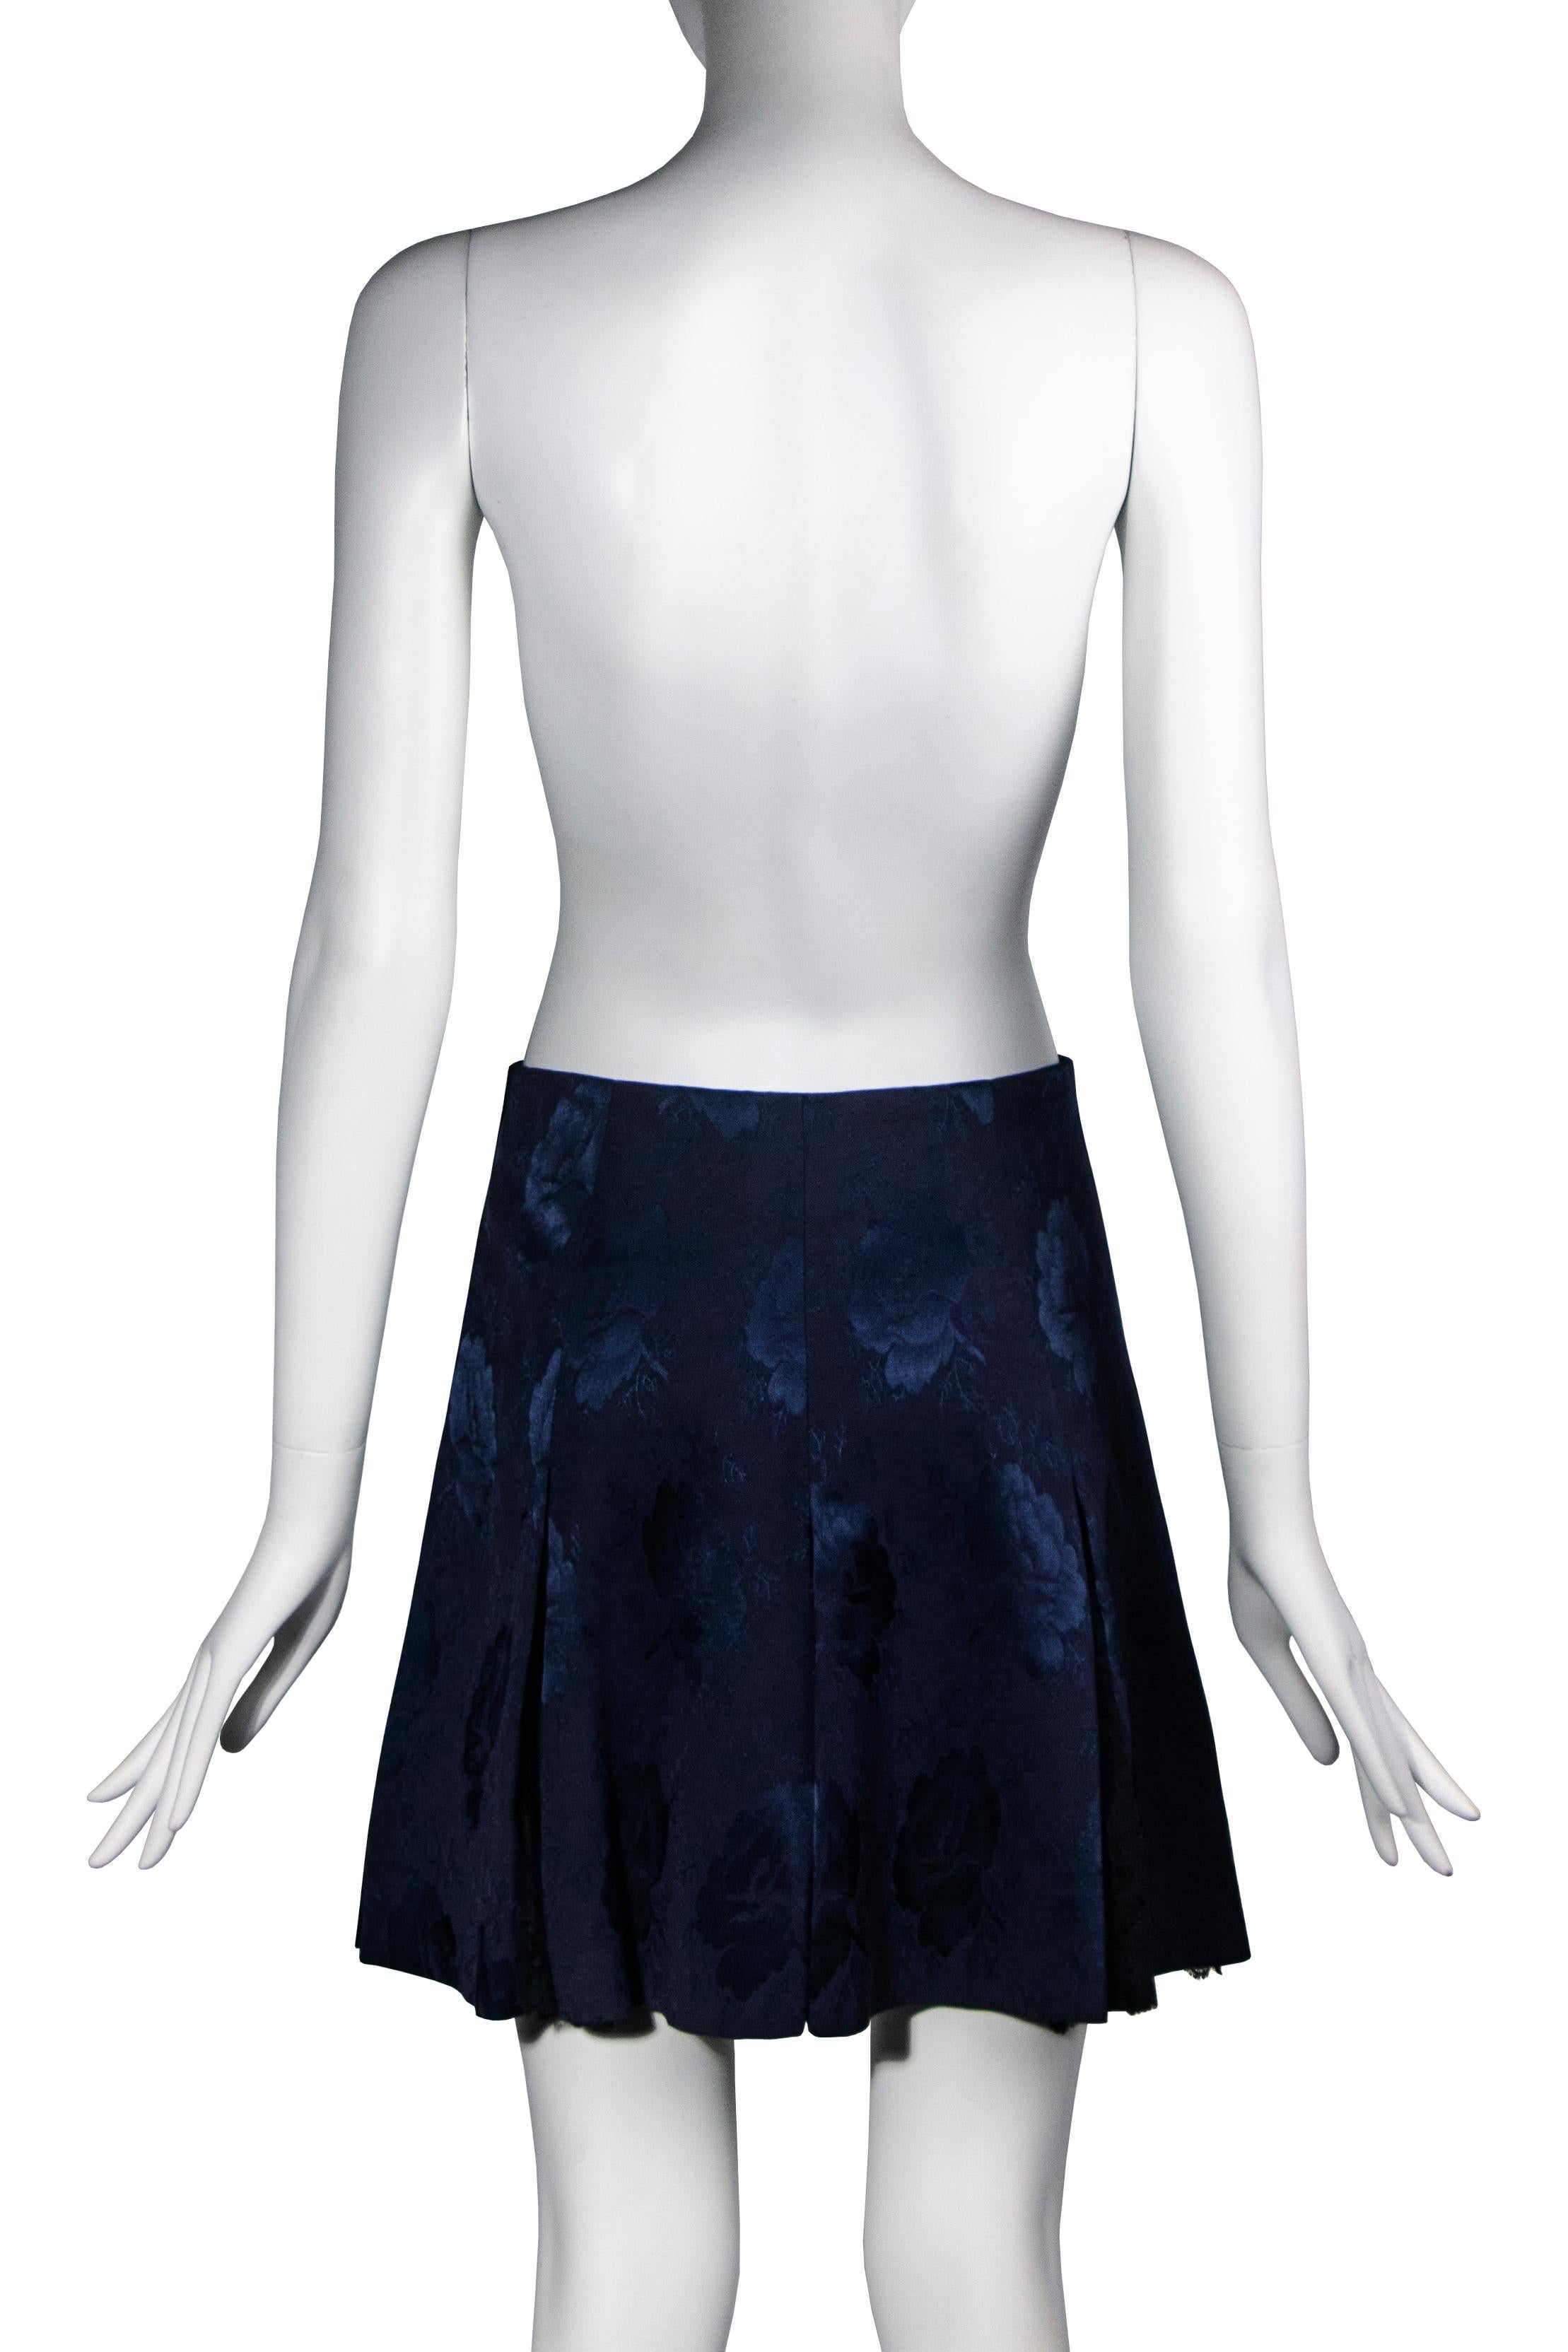 Christian Dior by John Galliano navy silk brocade & lace skirt, fw 1997 For Sale 7